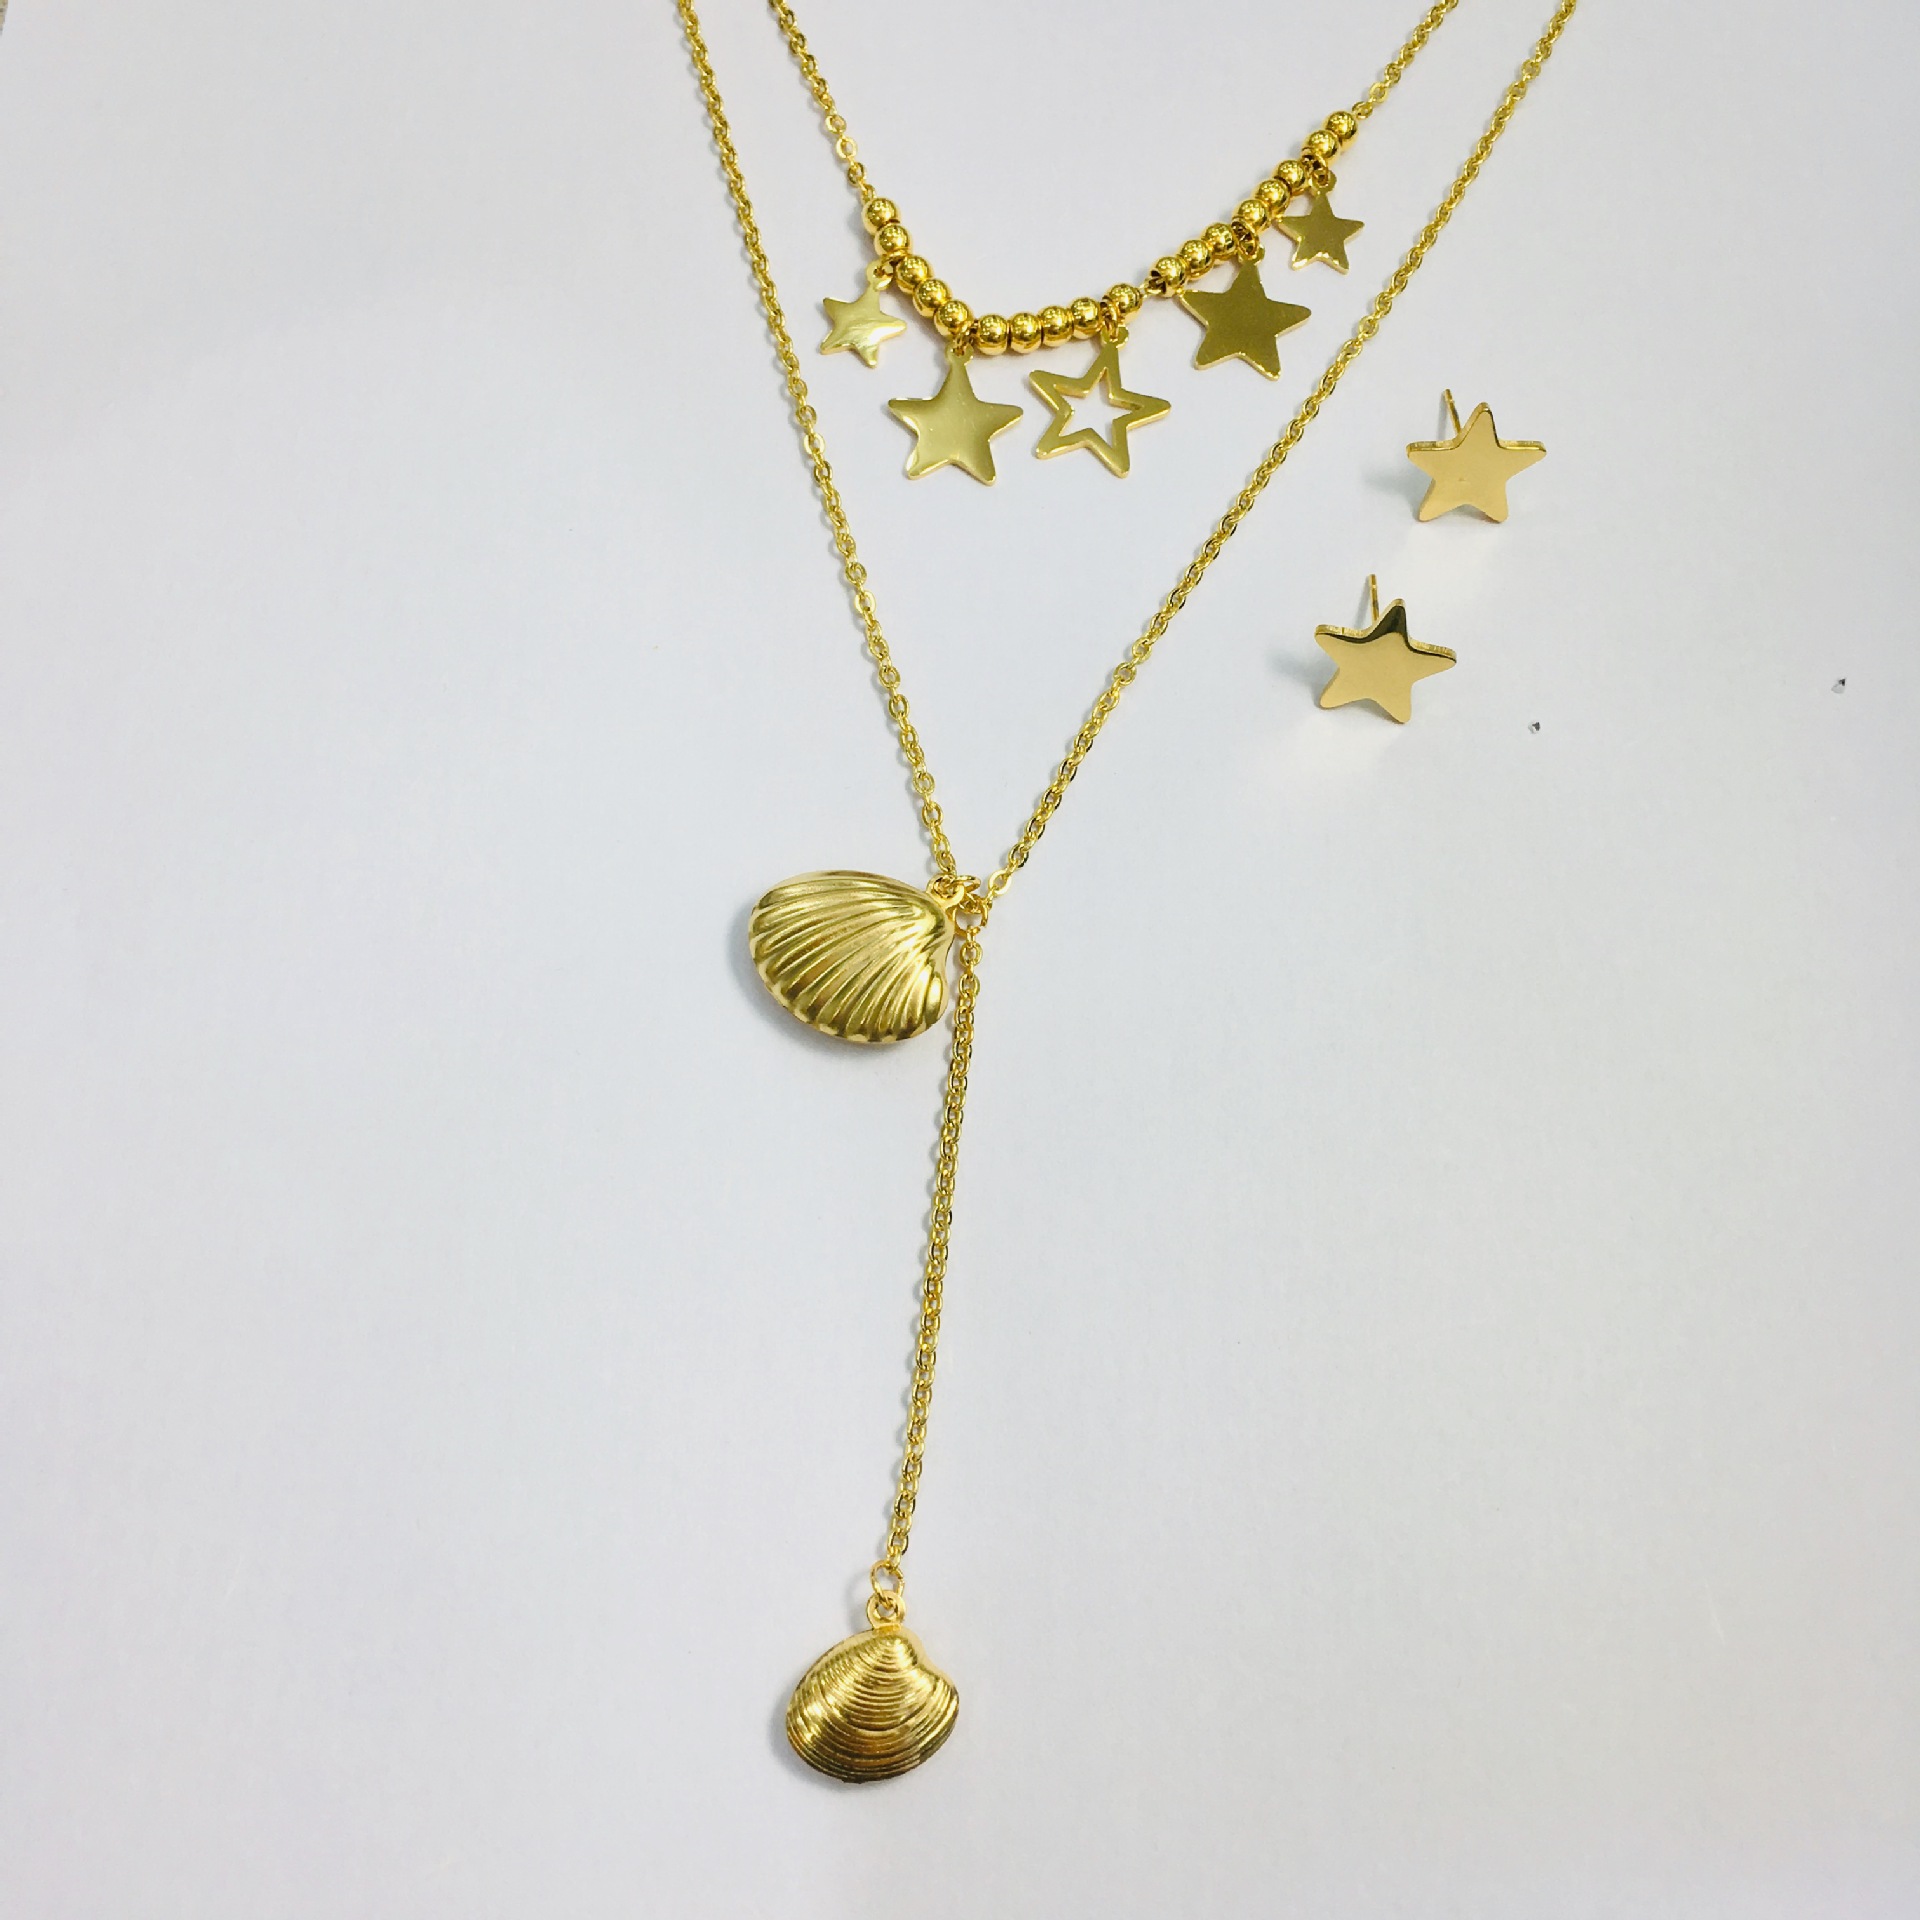 Gold Plated Double Layer Sea Star Shell Necklace Earring Set Jewelry For Women